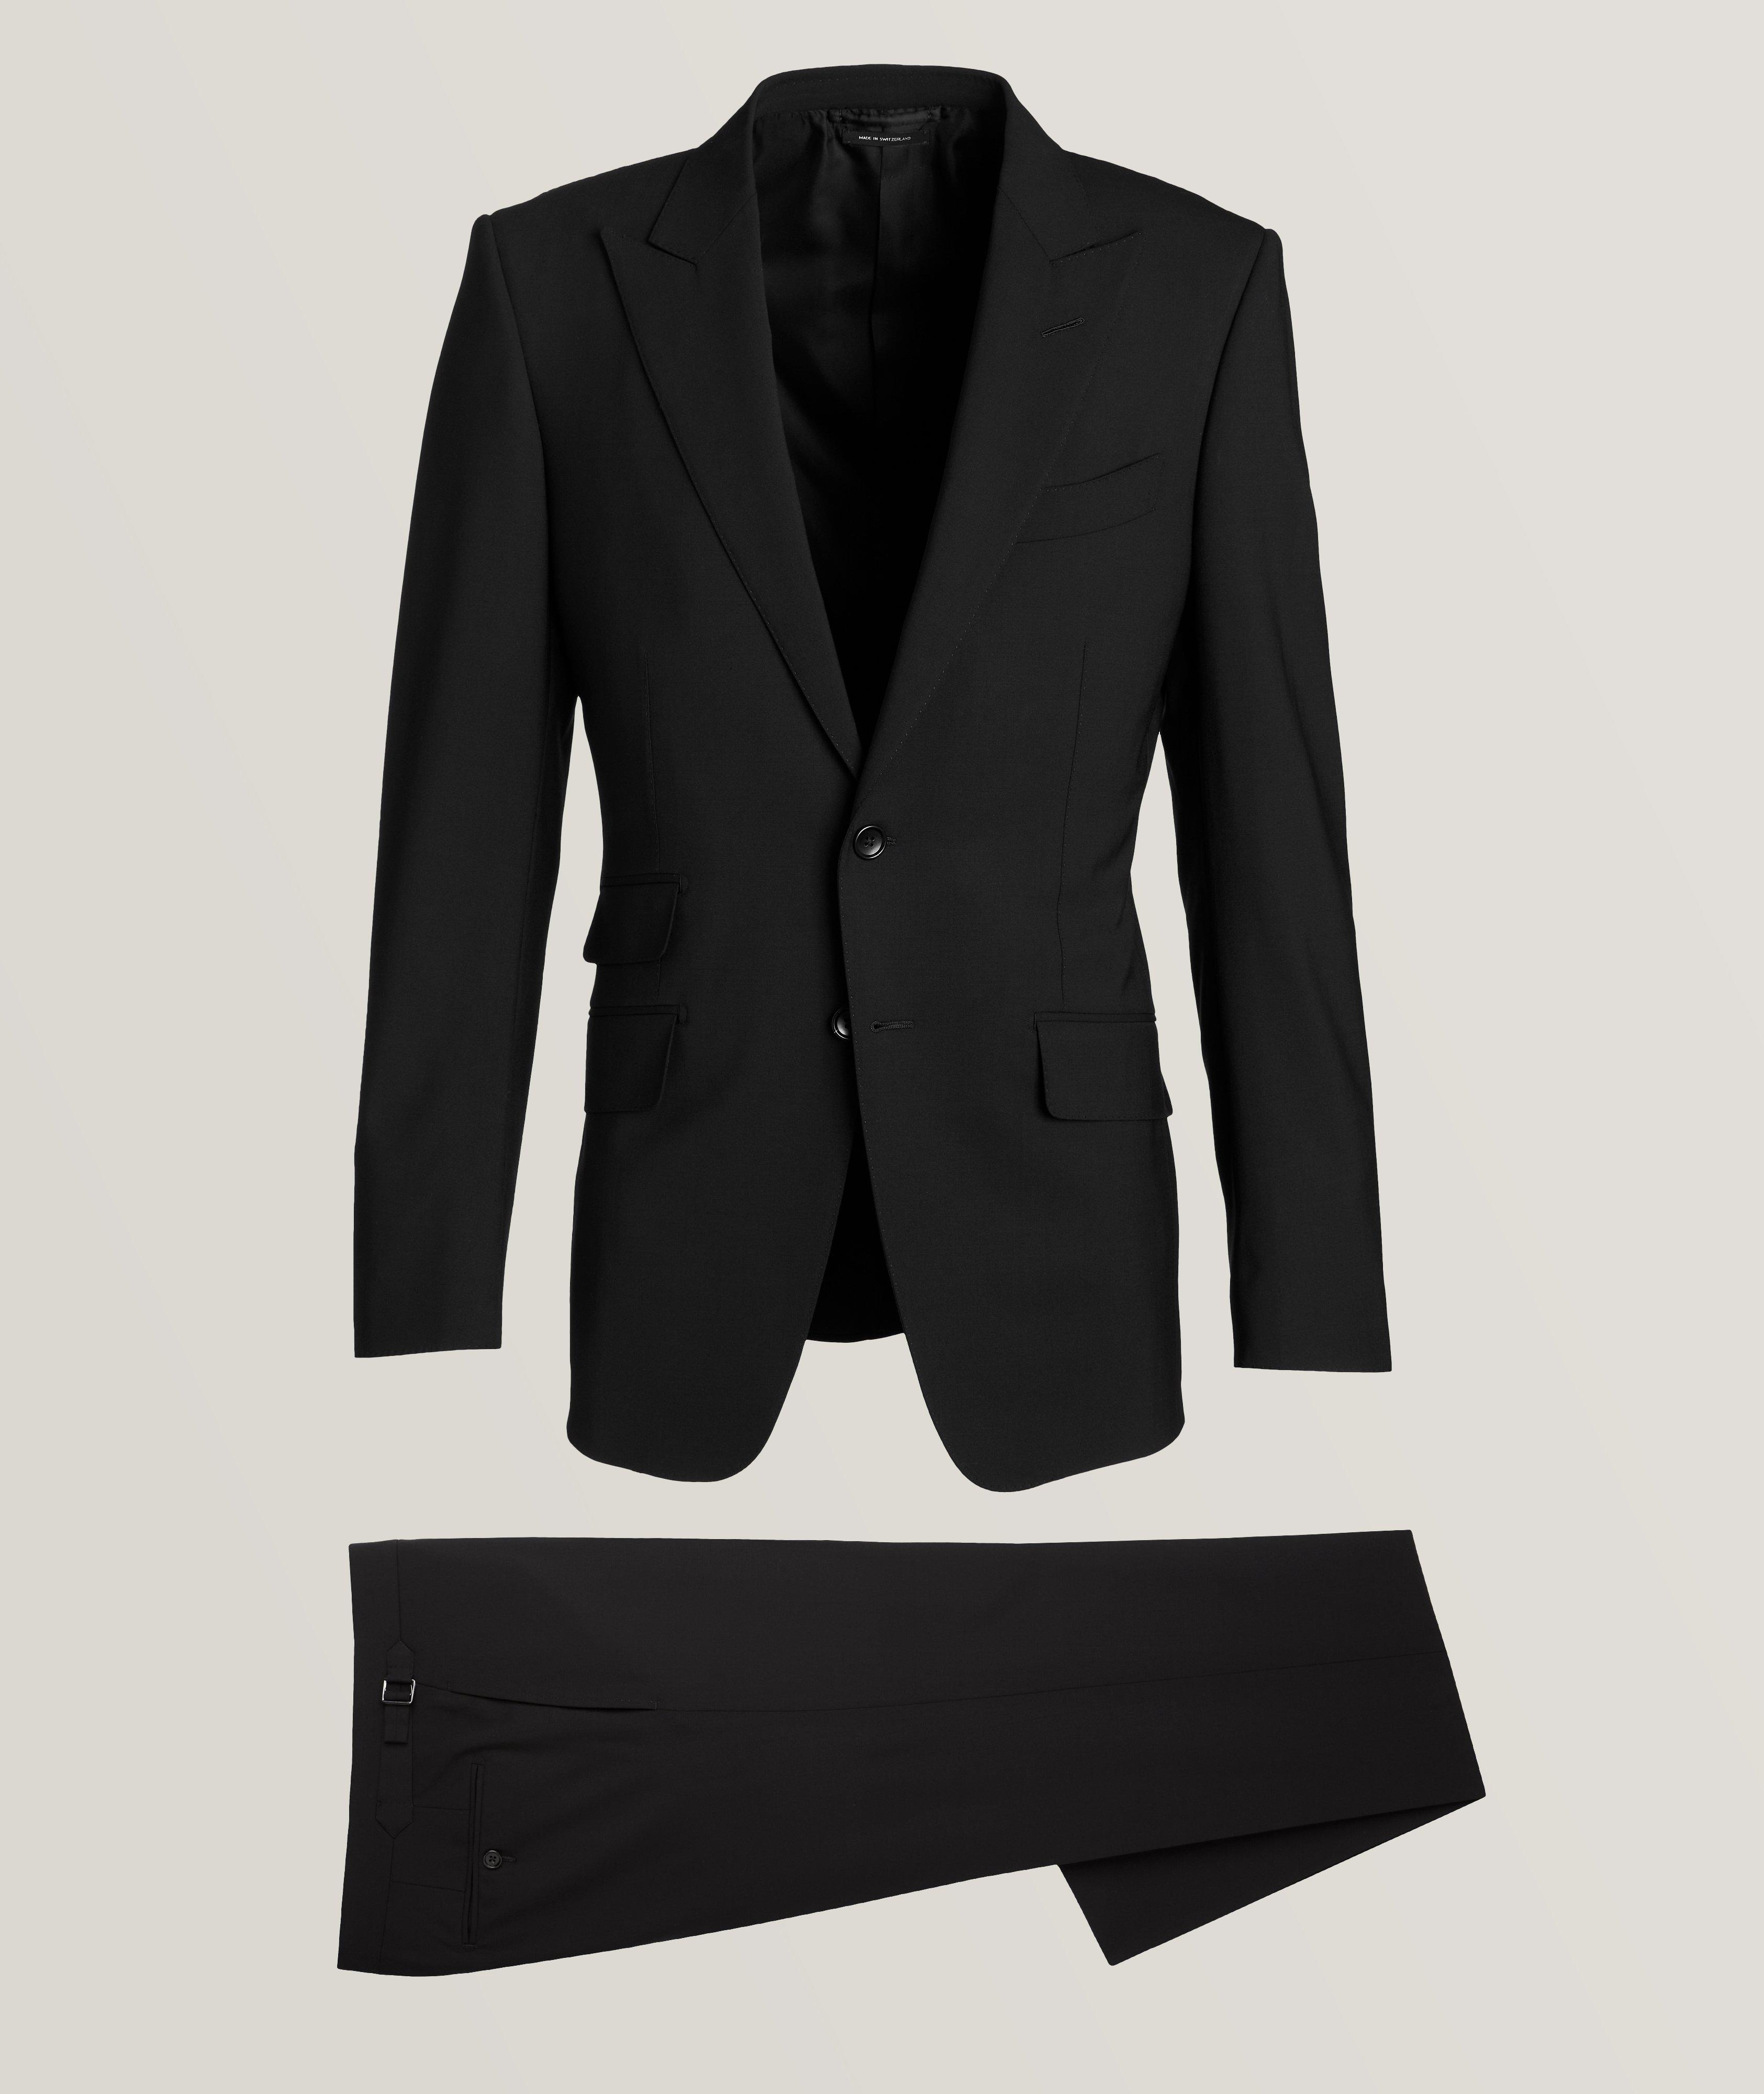 O'Connor Plain Weave Stretch-Wool Suit image 0